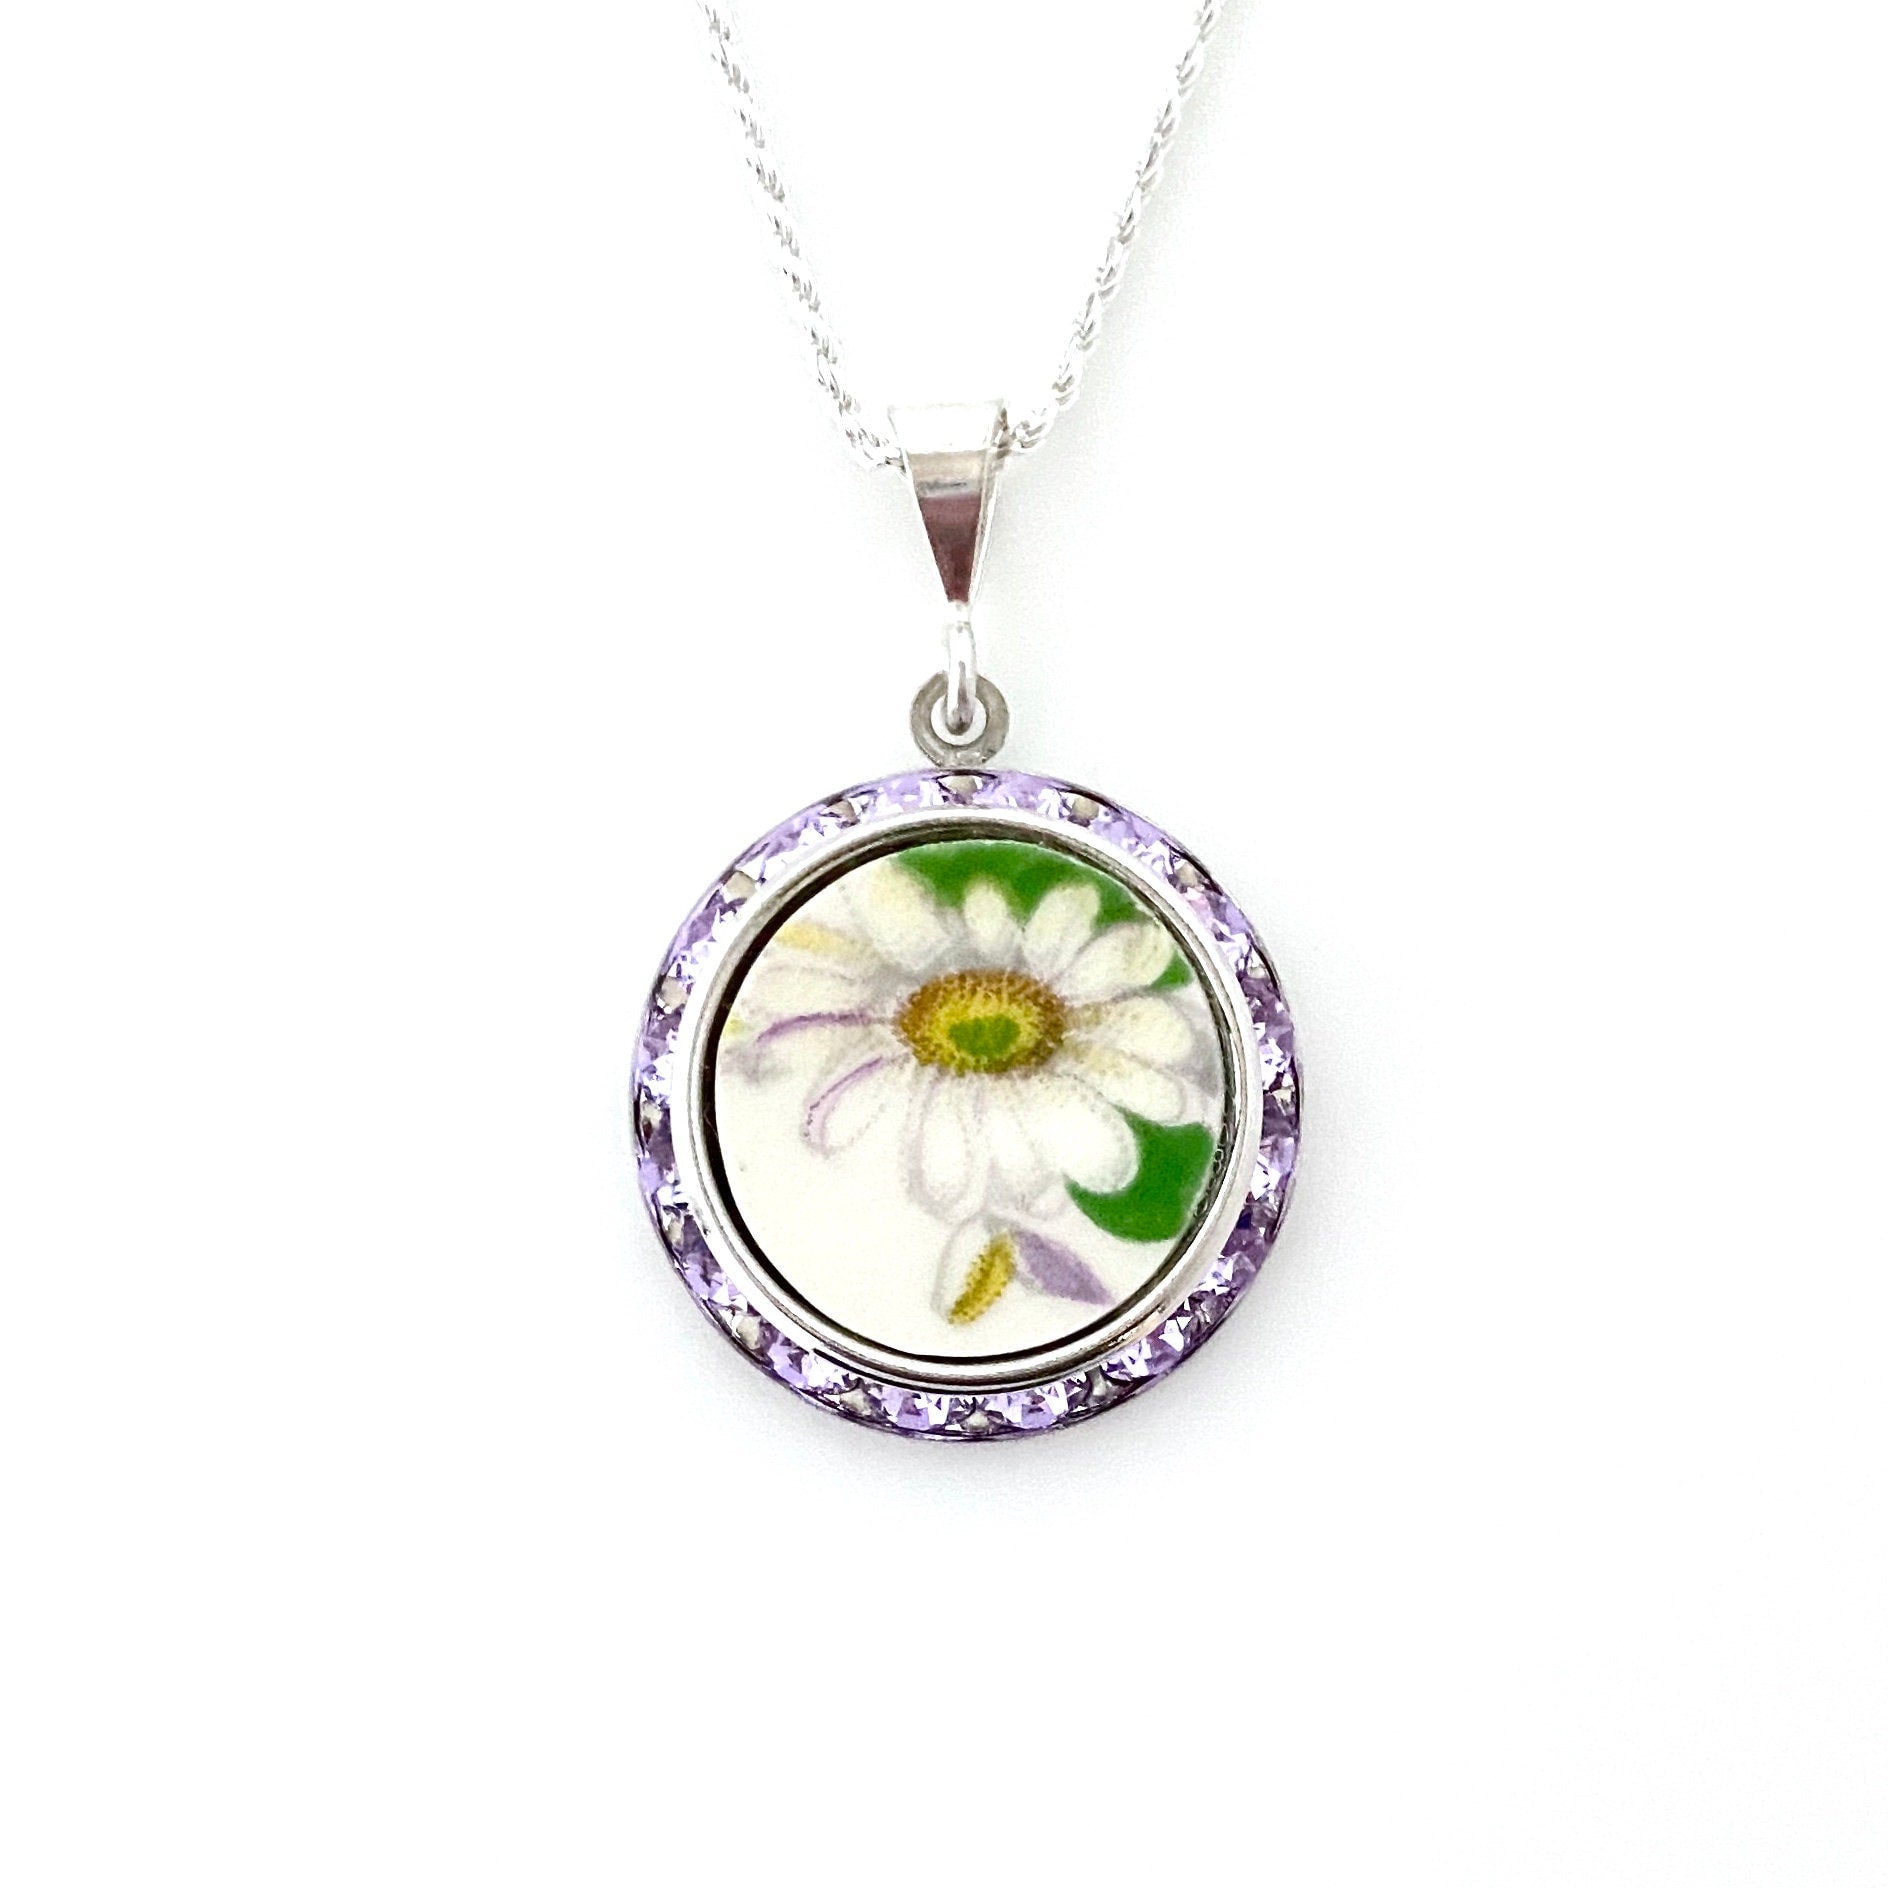 Broken China Jewelry Daisy Pendant Necklace, Unique Gifts for Women, Crystal Jewelry